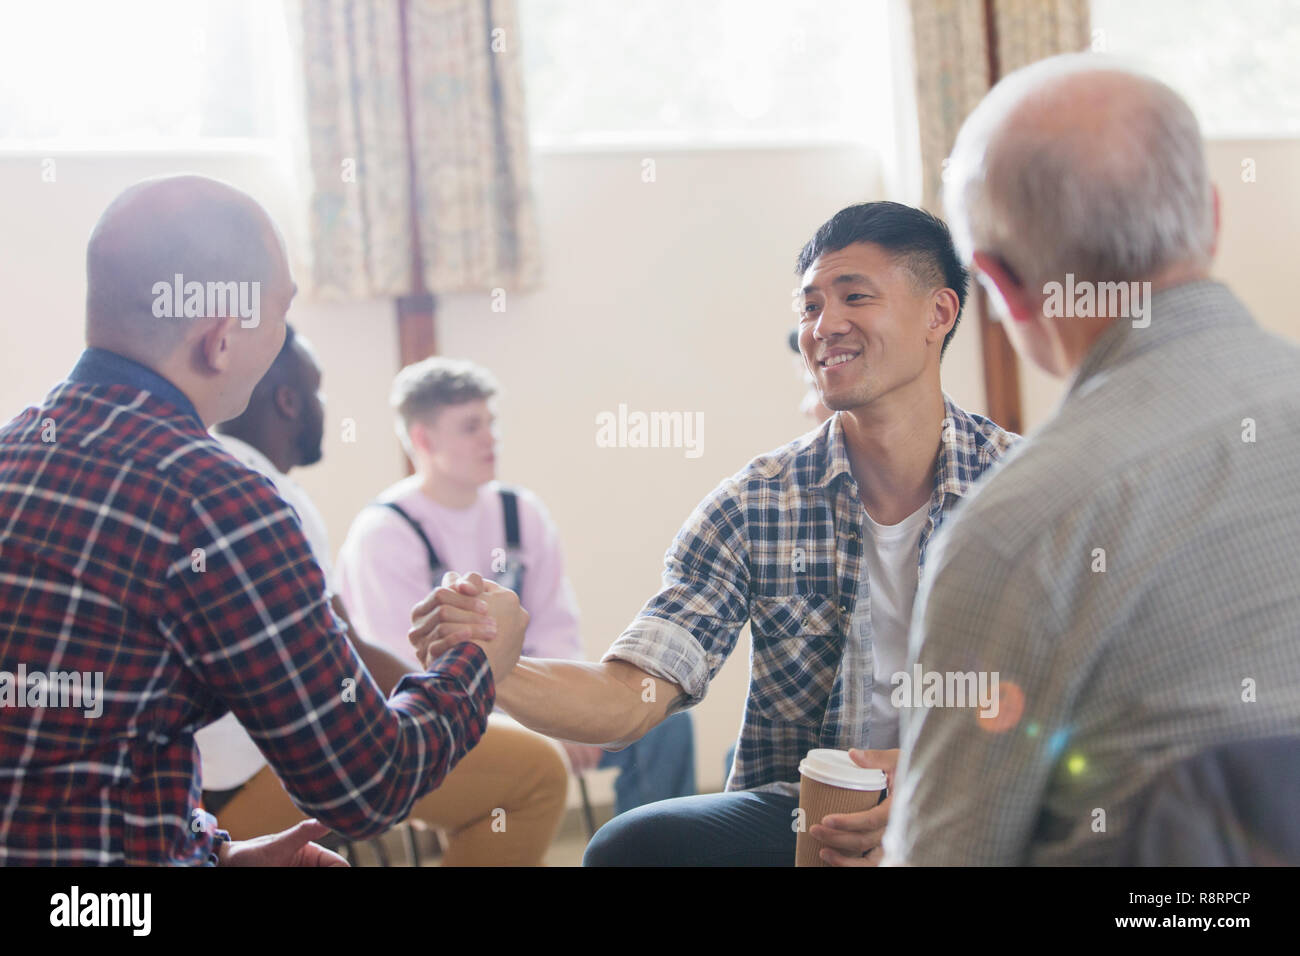 Men shaking hands in group therapy in community center Stock Photo